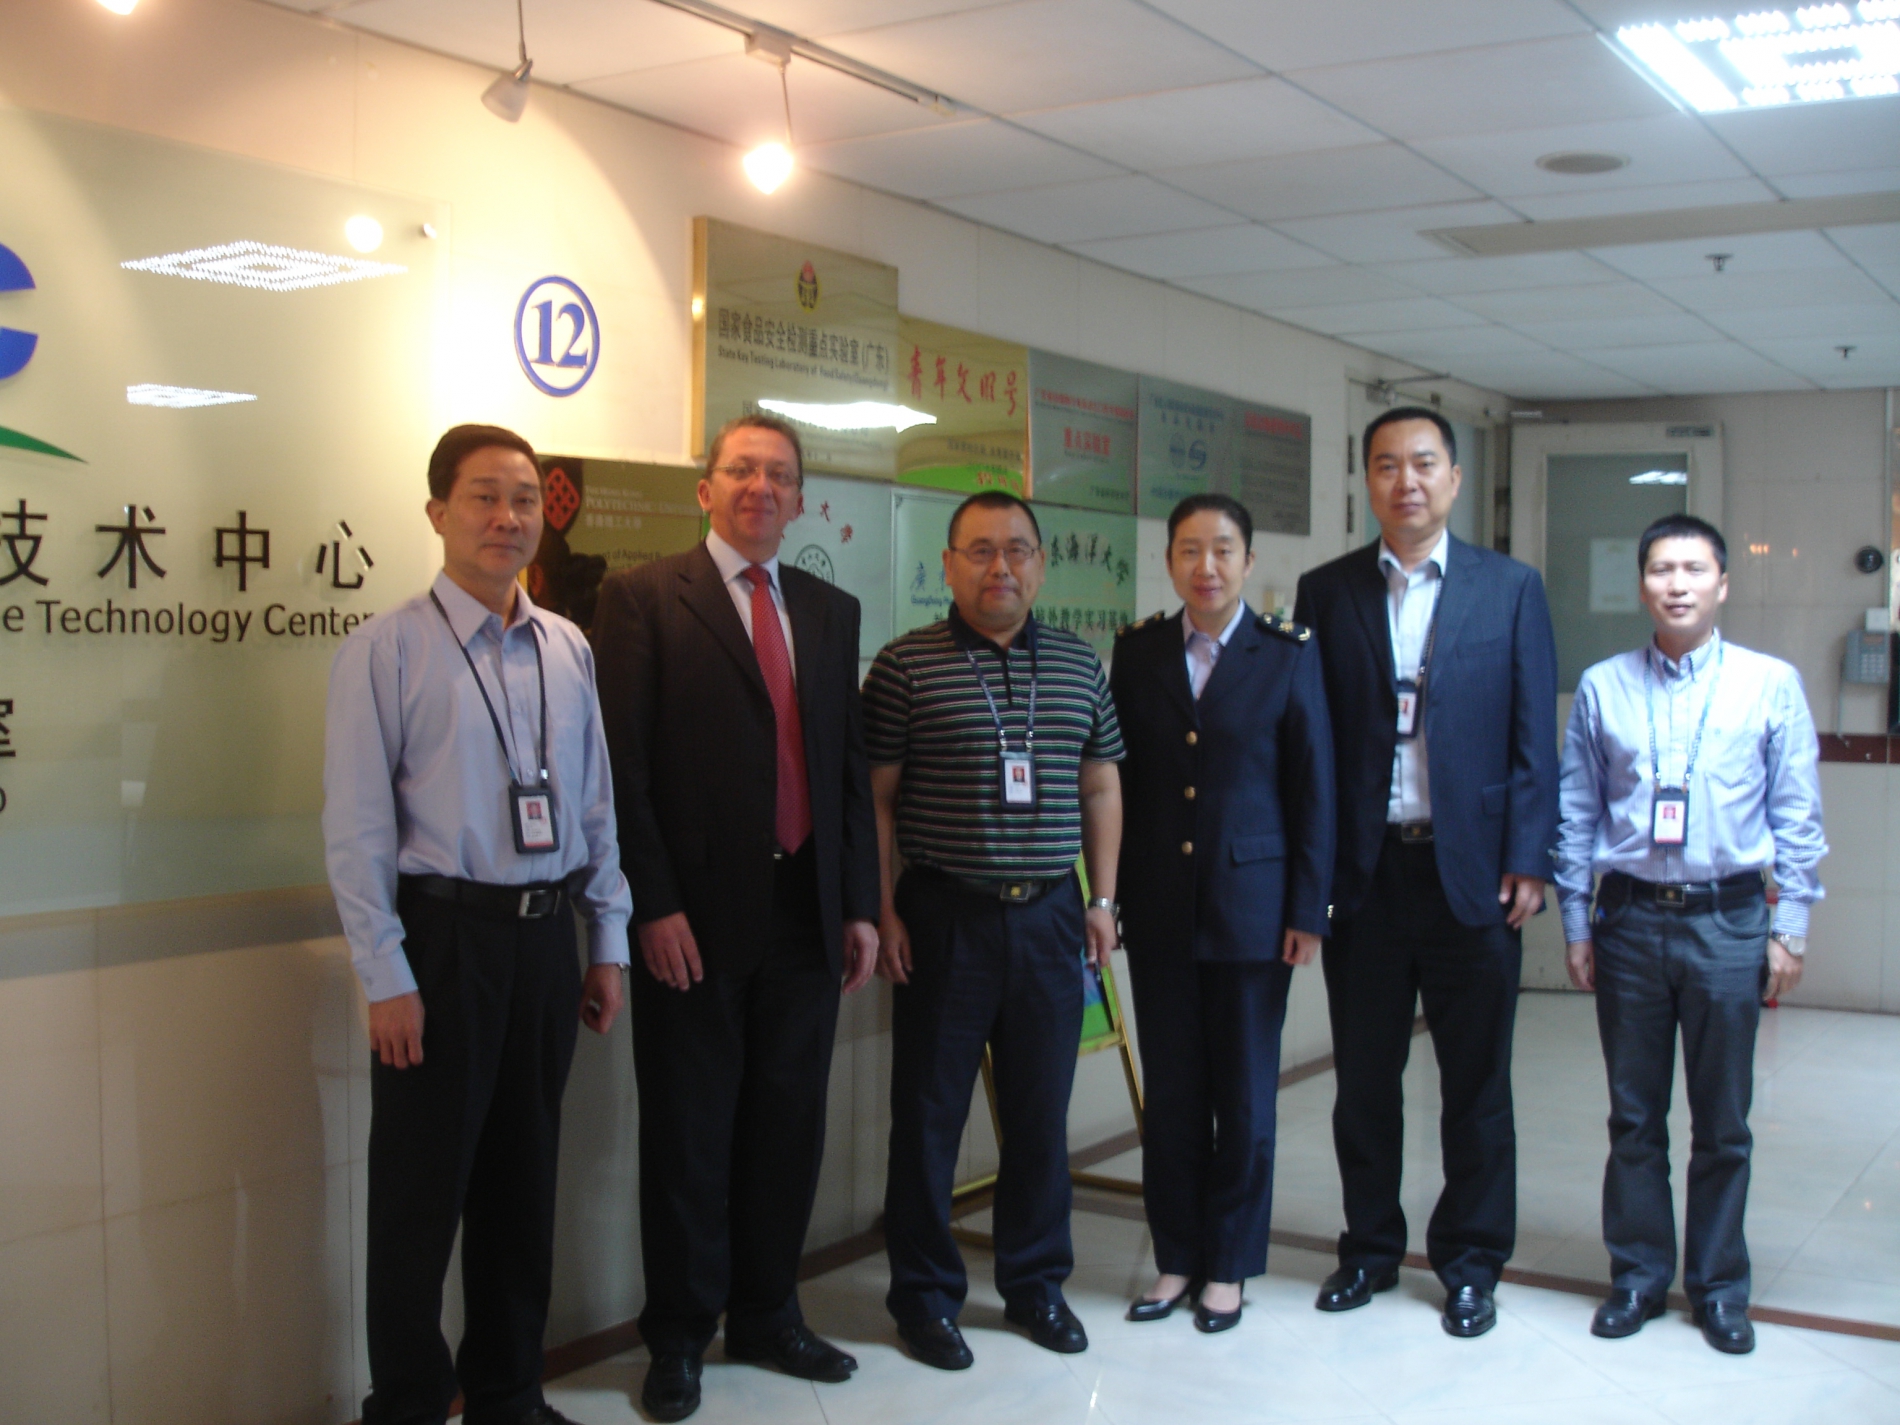 The OIV is welcomed by the Guangdong Inspection and Quarantine Technology Center (China)